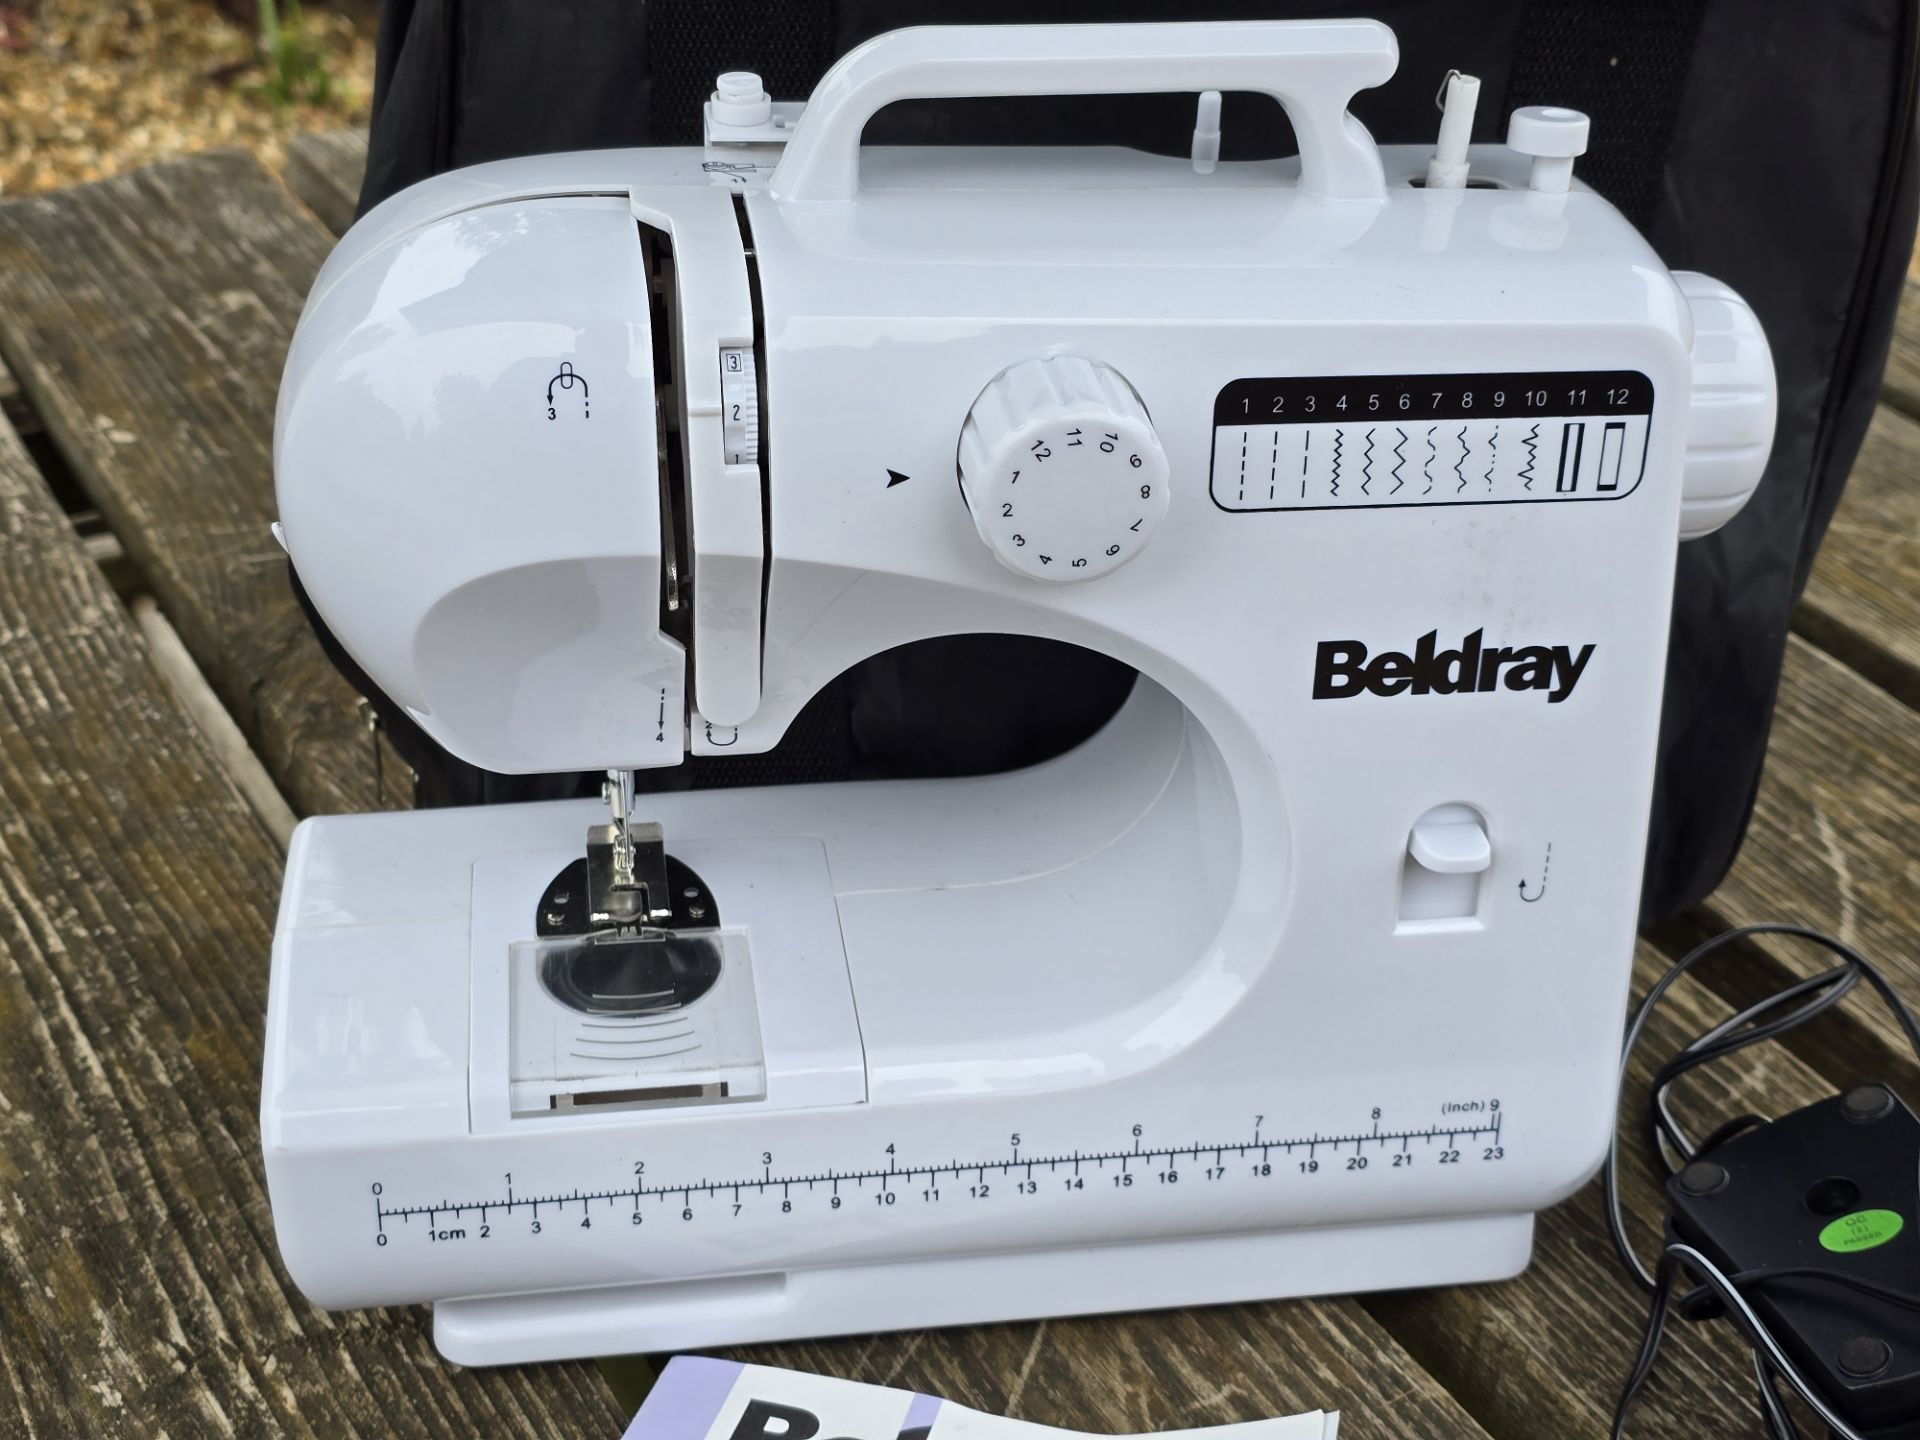 Beldray 12 Stitch portable sewing machine with bag and extras - tested - Image 3 of 8